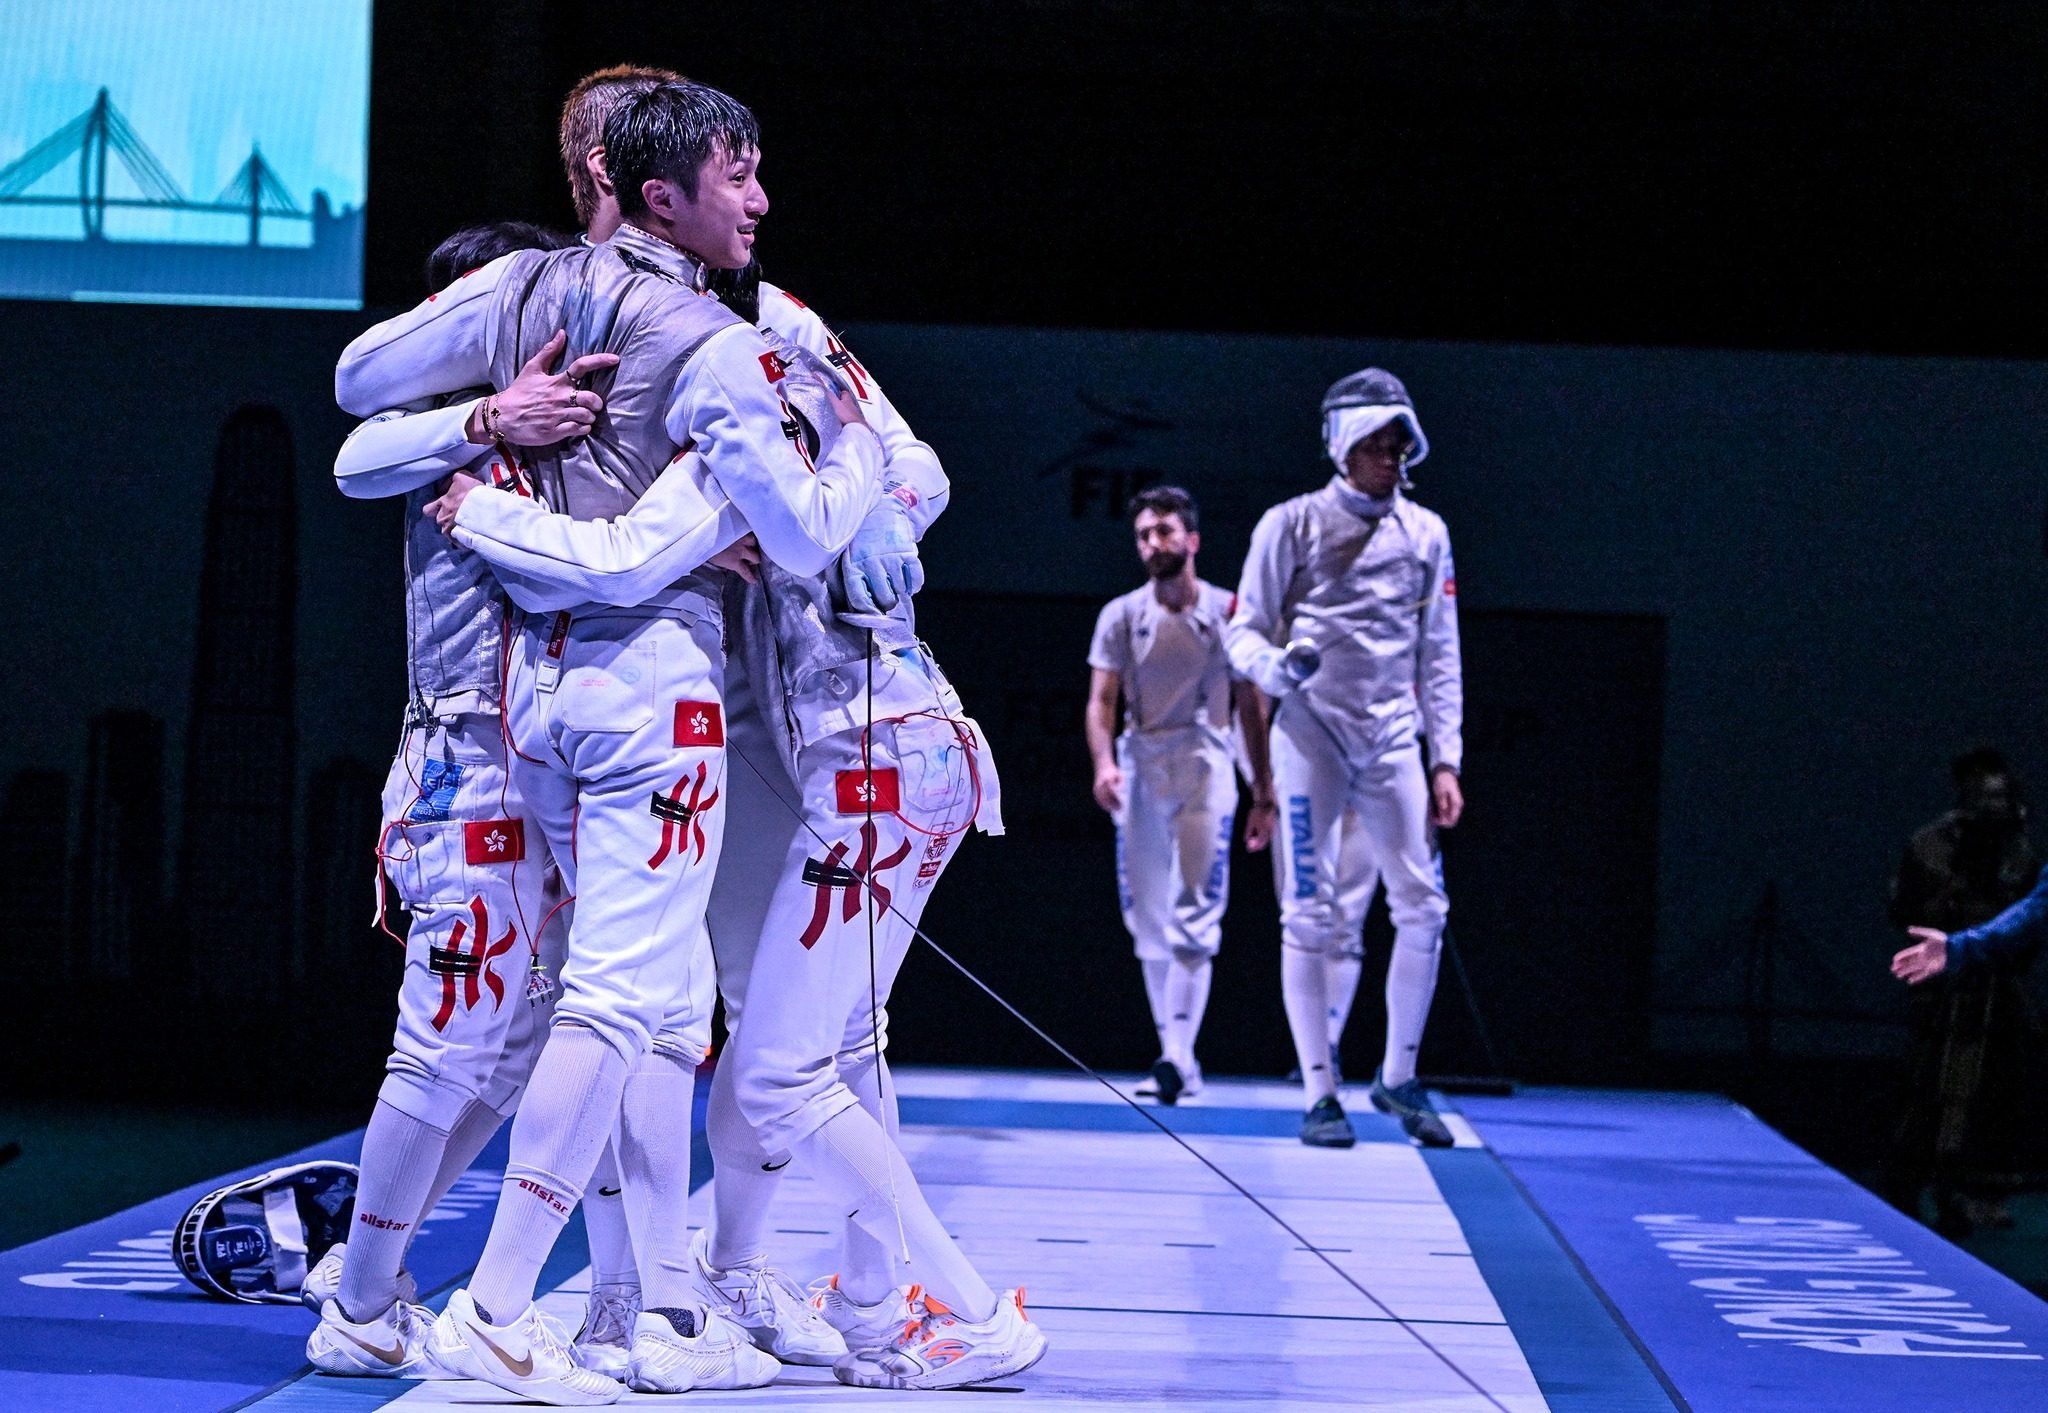 Hong Kong’s men’s foil team win a historic World Cup on Saturday. Photo: FIE